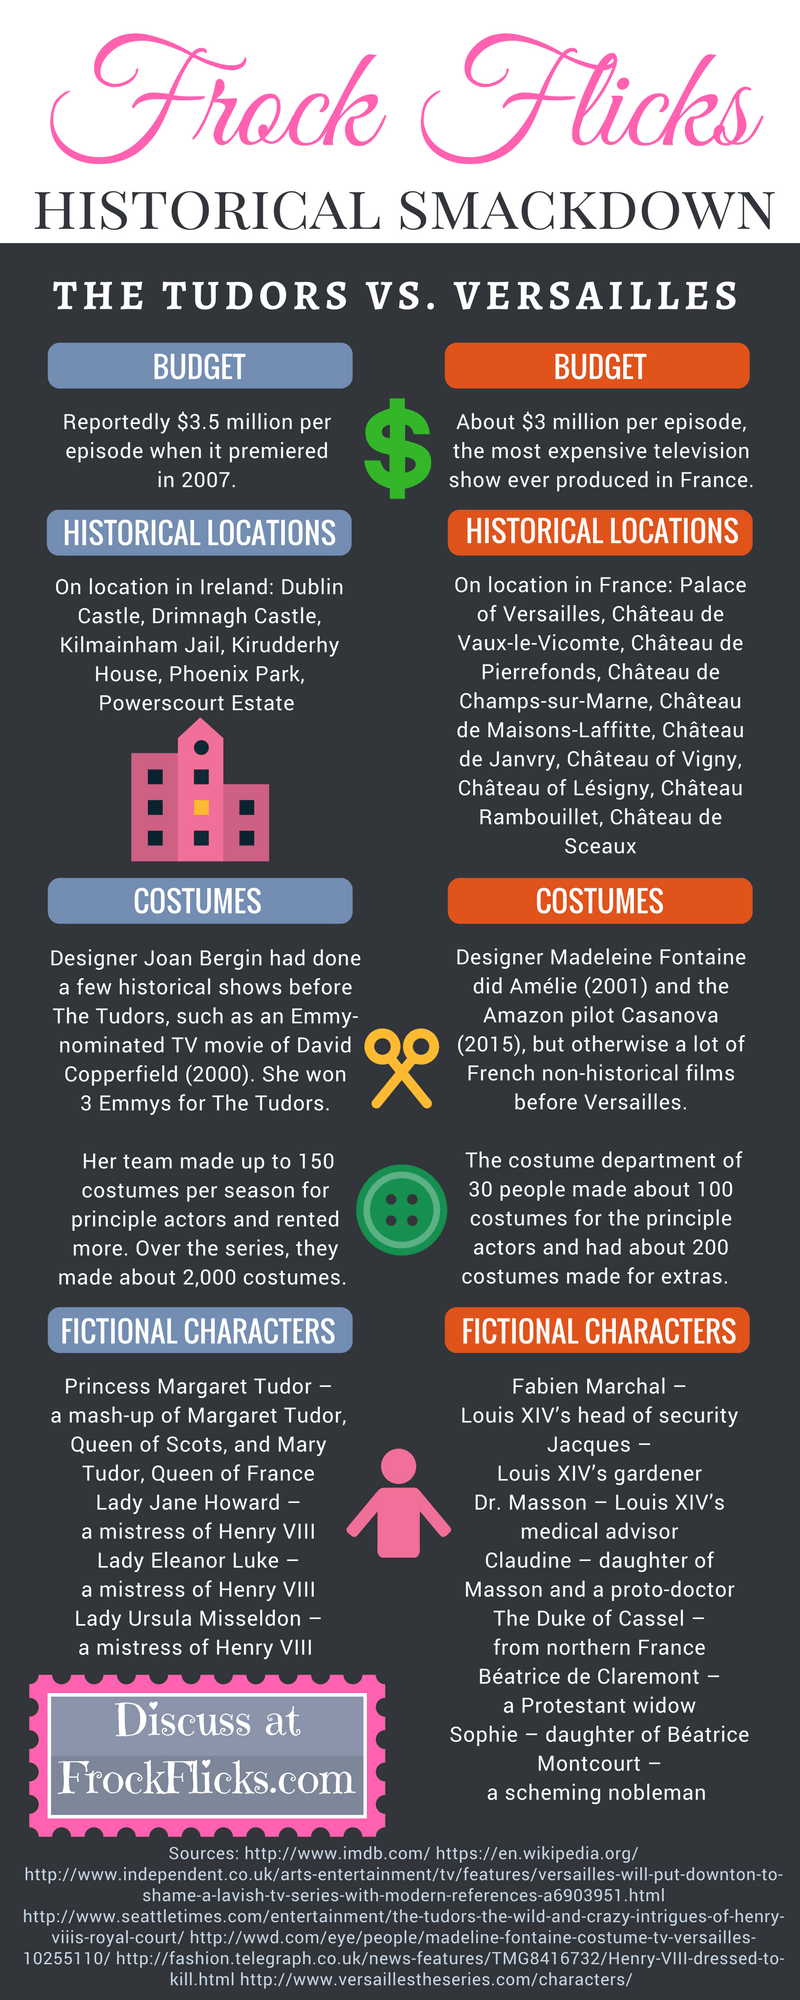 The Tudors vs. Versailles infographic by Frock Flicks